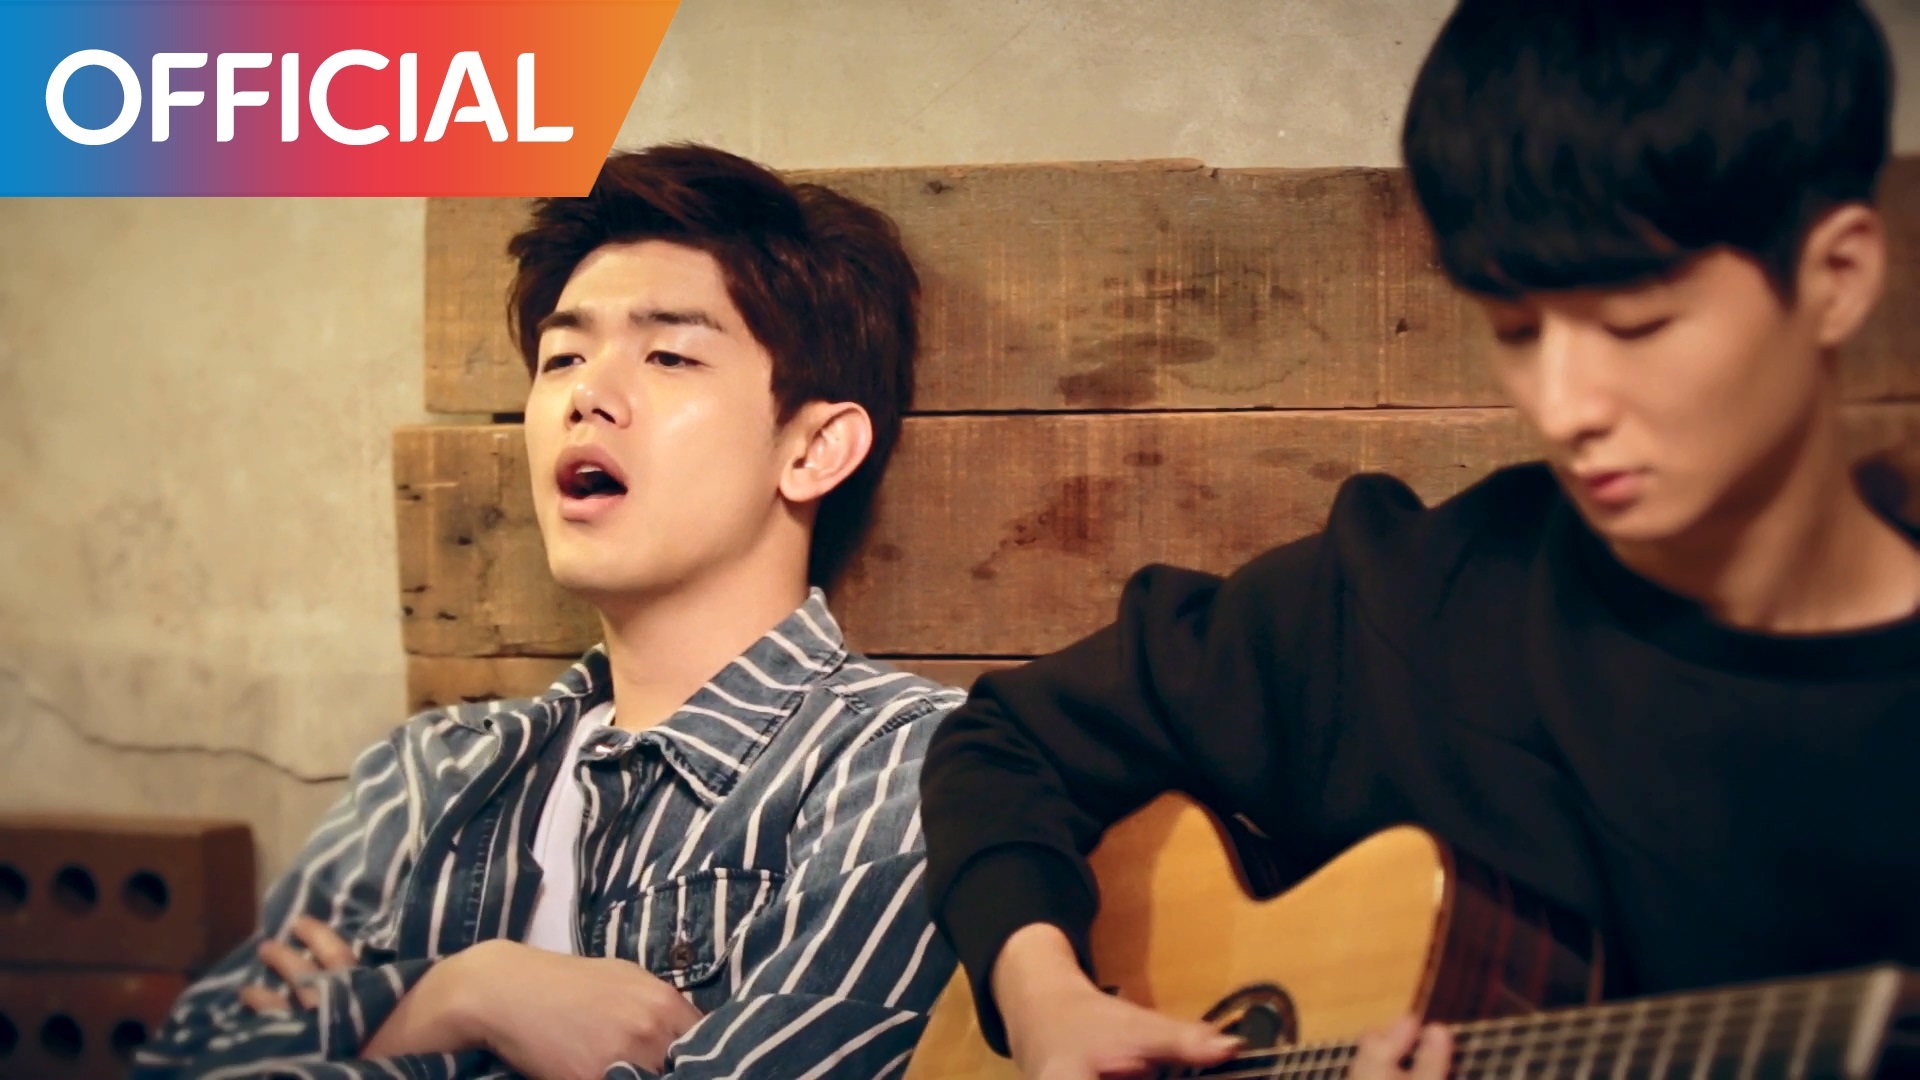 [Eric Nam 에릭남 보이스 프로젝트] Justin Bieber 'Love Yourself' Cover with Sungha Jung